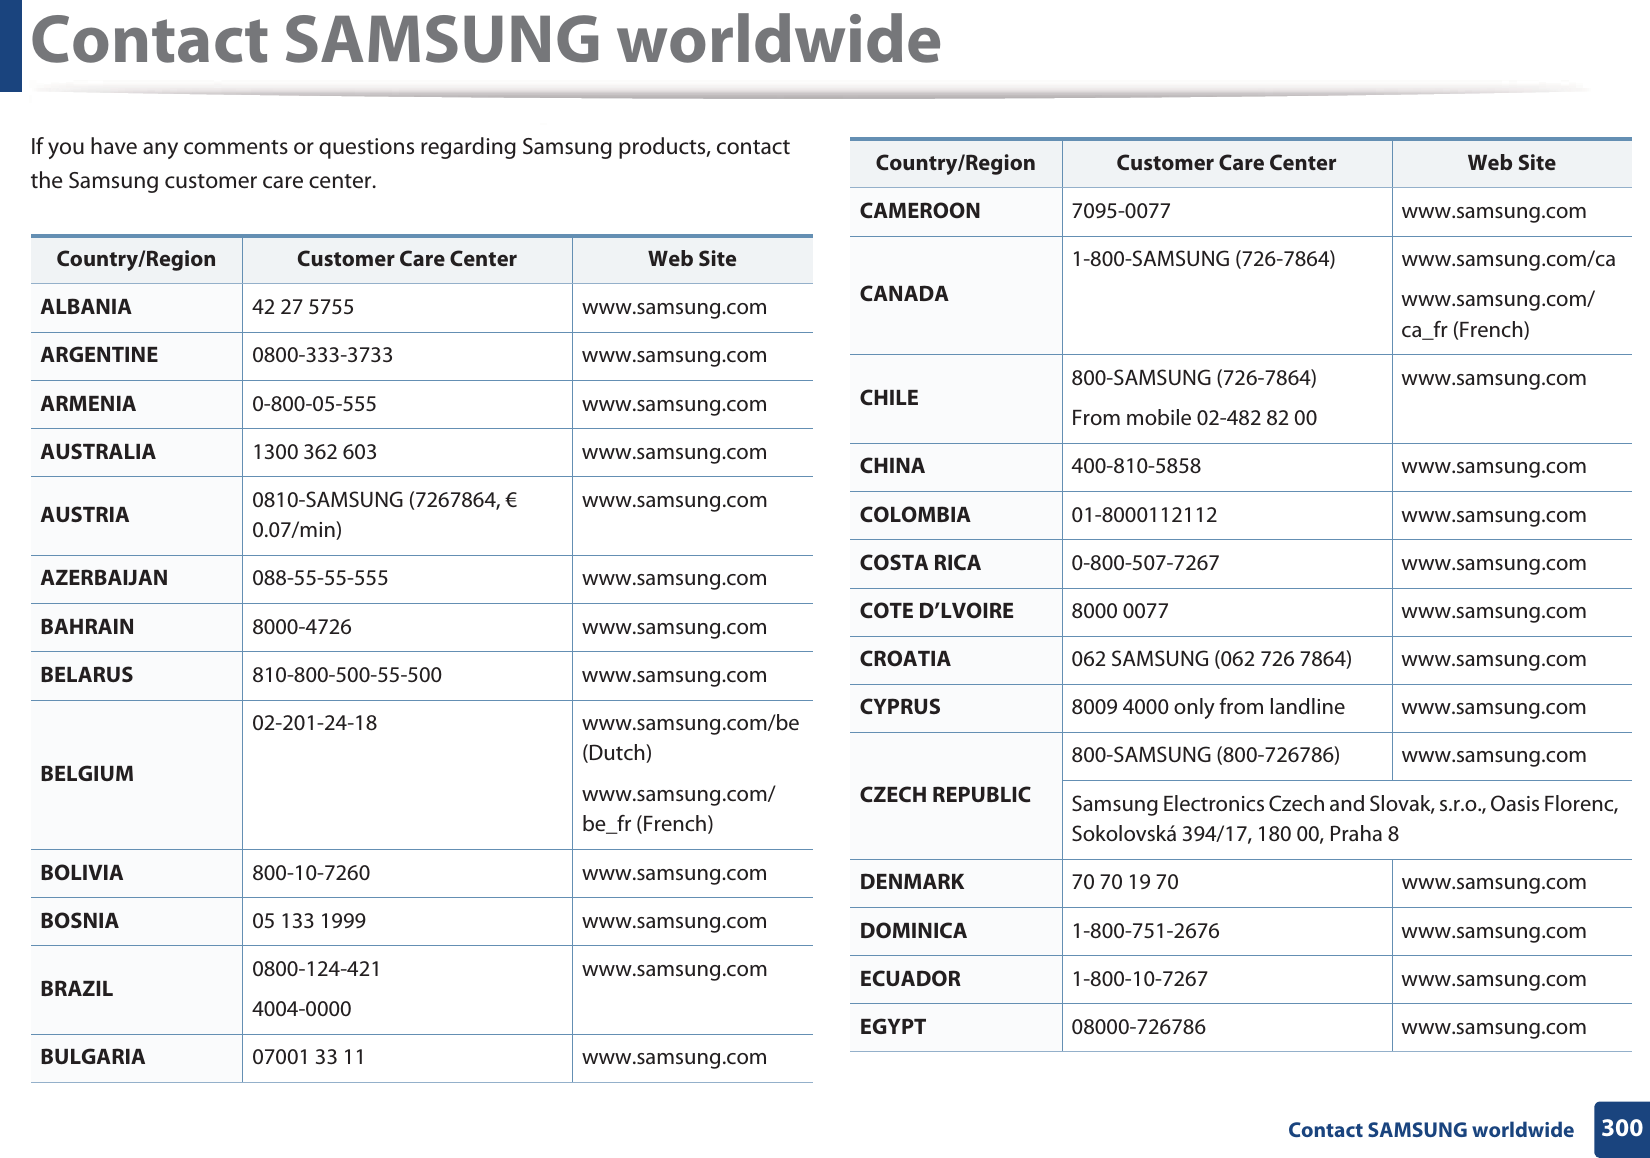 300 Contact SAMSUNG worldwideContact SAMSUNG worldwideIf you have any comments or questions regarding Samsung products, contact the Samsung customer care center.Country/Region Customer Care Center  Web SiteALBANIA 42 27 5755 www.samsung.comARGENTINE 0800-333-3733 www.samsung.comARMENIA 0-800-05-555 www.samsung.comAUSTRALIA 1300 362 603 www.samsung.comAUSTRIA 0810-SAMSUNG (7267864, € 0.07/min)www.samsung.comAZERBAIJAN 088-55-55-555 www.samsung.comBAHRAIN 8000-4726 www.samsung.comBELARUS 810-800-500-55-500 www.samsung.comBELGIUM02-201-24-18 www.samsung.com/be (Dutch)www.samsung.com/be_fr (French)BOLIVIA 800-10-7260 www.samsung.comBOSNIA 05 133 1999 www.samsung.comBRAZIL 0800-124-4214004-0000www.samsung.comBULGARIA 07001 33 11 www.samsung.comCAMEROON 7095-0077 www.samsung.comCANADA1-800-SAMSUNG (726-7864) www.samsung.com/cawww.samsung.com/ca_fr (French)CHILE 800-SAMSUNG (726-7864)From mobile 02-482 82 00www.samsung.comCHINA 400-810-5858 www.samsung.comCOLOMBIA 01-8000112112 www.samsung.comCOSTA RICA 0-800-507-7267 www.samsung.comCOTE D’LVOIRE 8000 0077 www.samsung.comCROATIA 062 SAMSUNG (062 726 7864) www.samsung.comCYPRUS 8009 4000 only from landline www.samsung.comCZECH REPUBLIC800-SAMSUNG (800-726786) www.samsung.comSamsung Electronics Czech and Slovak, s.r.o., Oasis Florenc, Sokolovská 394/17, 180 00, Praha 8DENMARK 70 70 19 70 www.samsung.comDOMINICA 1-800-751-2676 www.samsung.comECUADOR 1-800-10-7267 www.samsung.comEGYPT 08000-726786 www.samsung.comCountry/Region Customer Care Center  Web Site